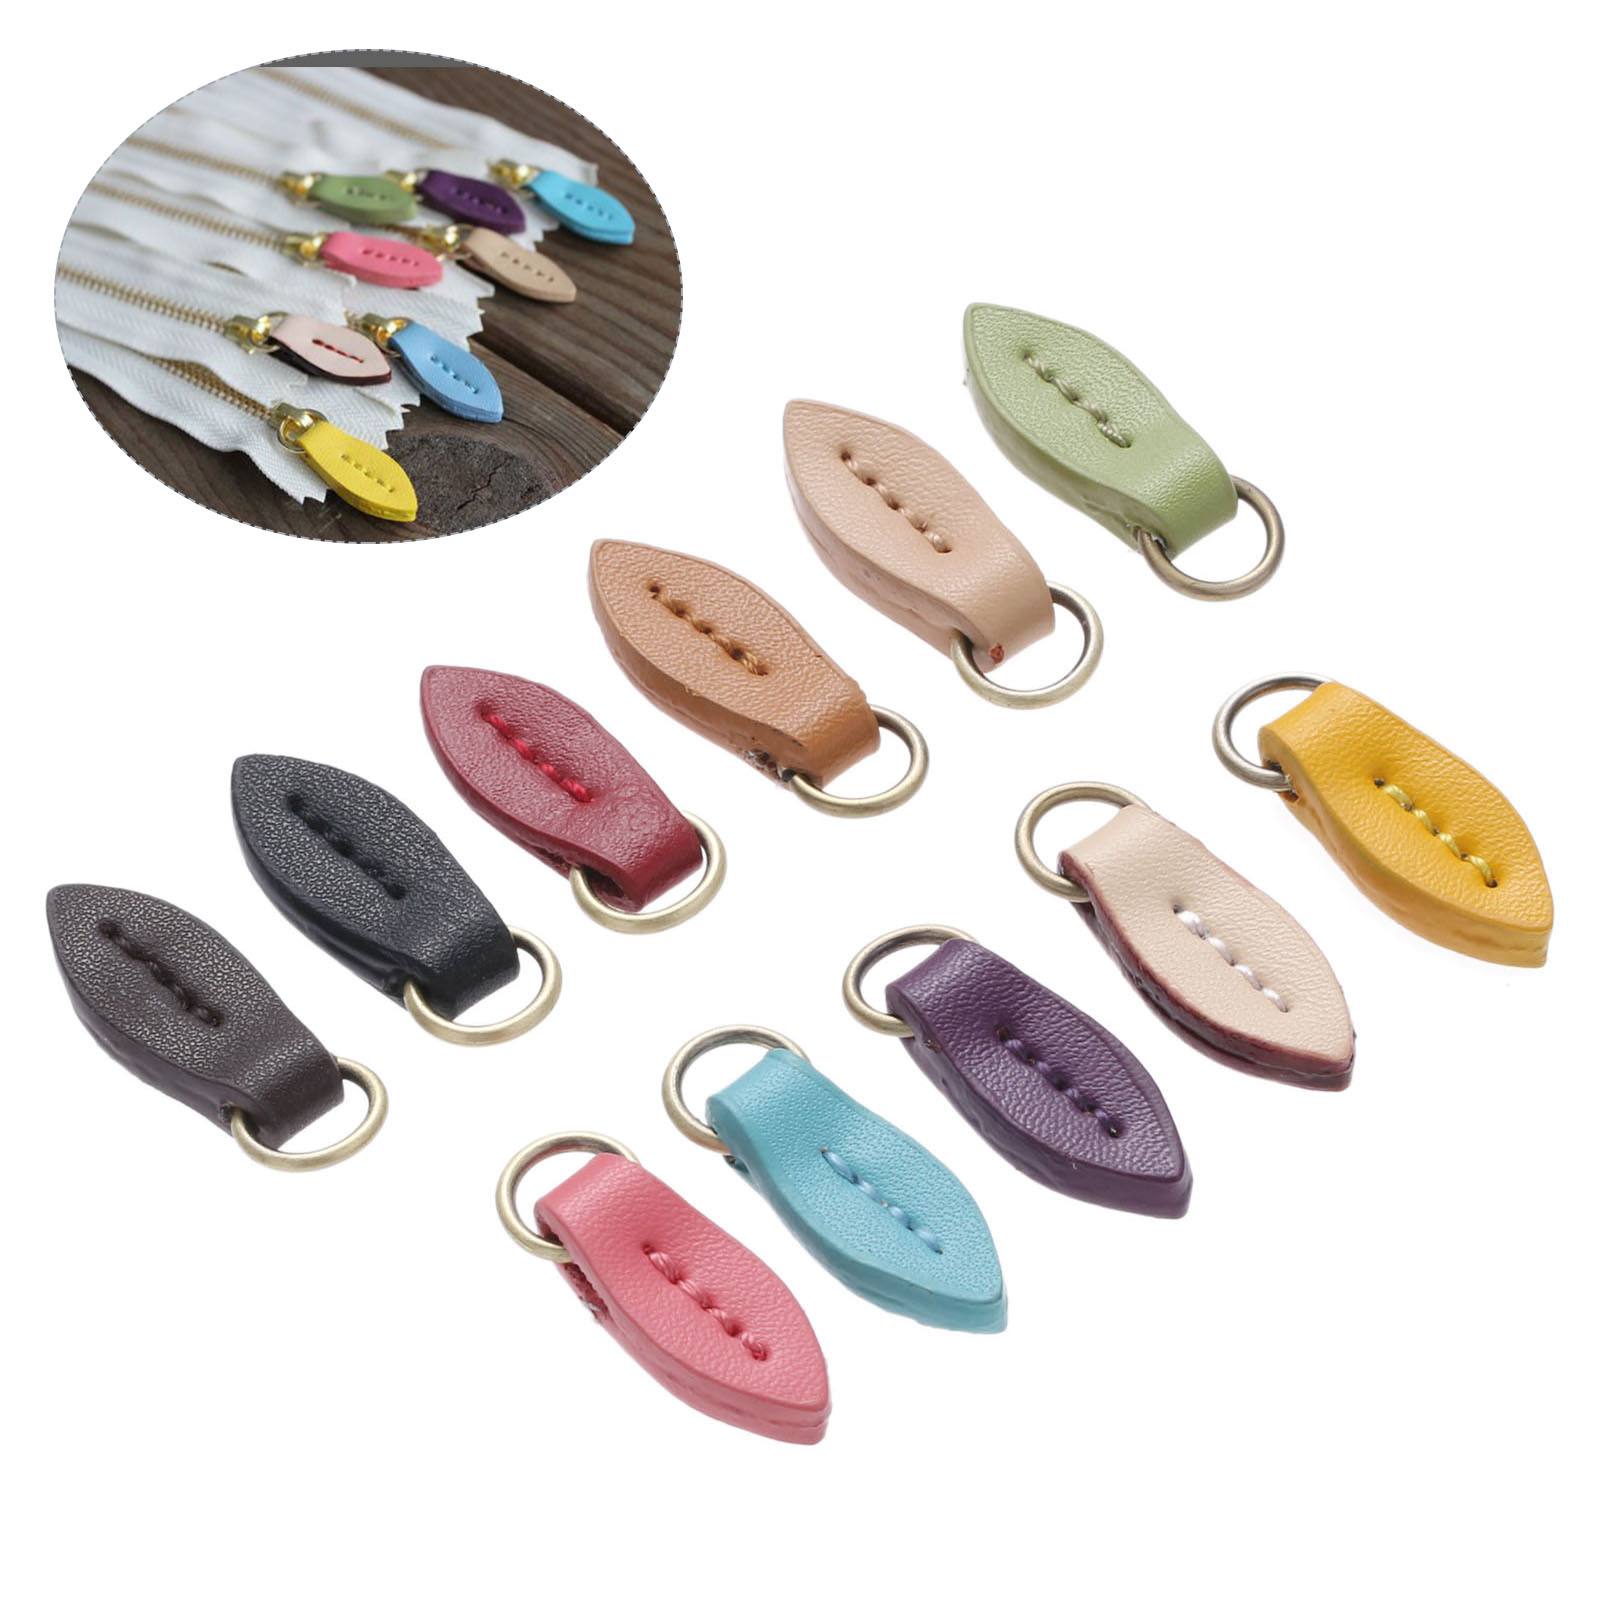 DRELD 5Pcs DIY Leather Zipper Sliders Pull Clothes O Ring Buckles Bag Shoes Zipper Puller Sliders for Sewing Crafts Fasteners